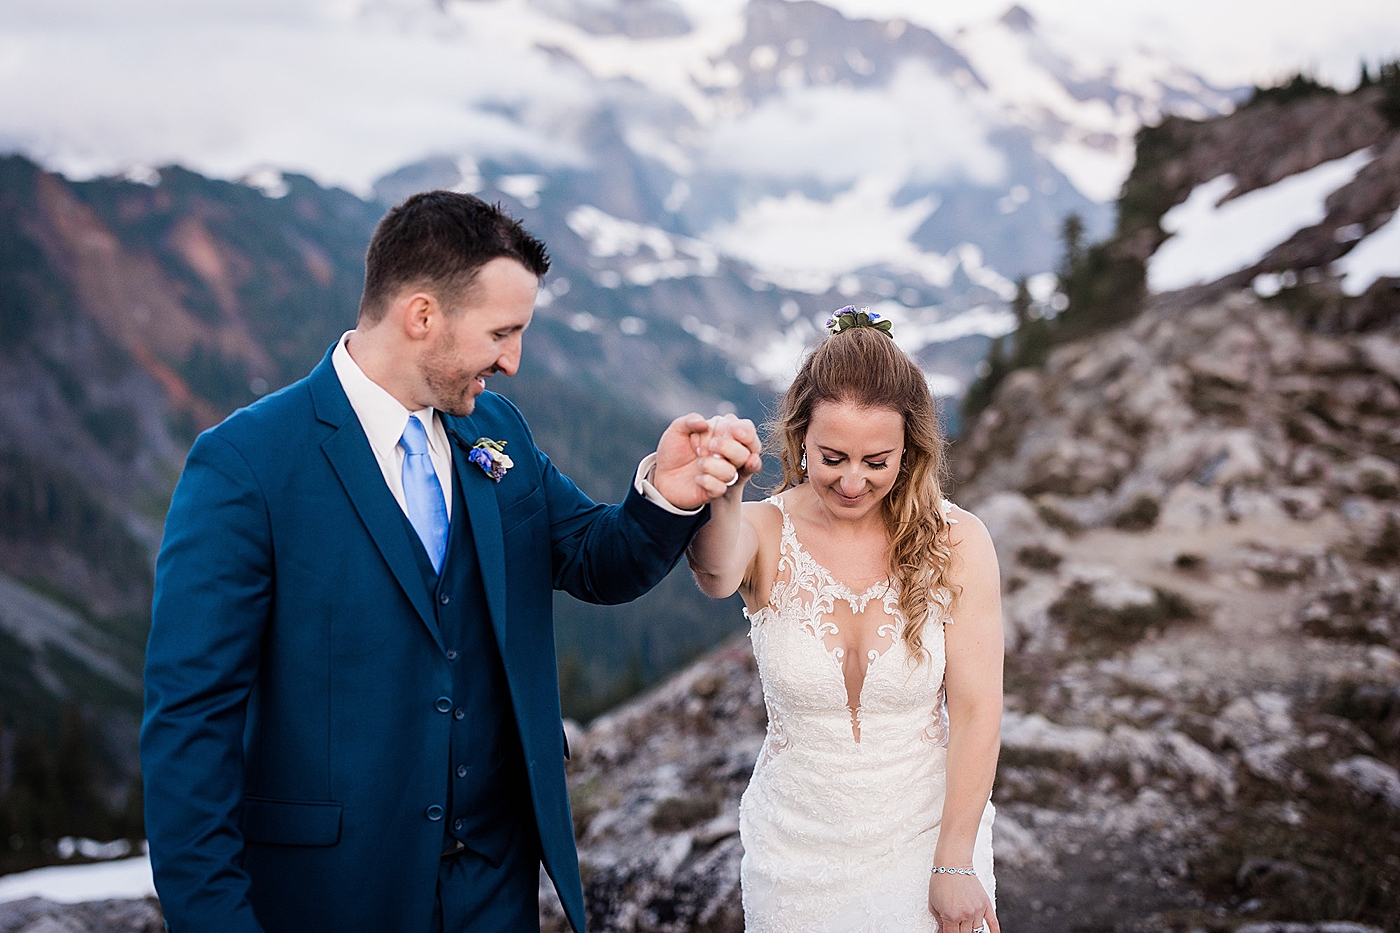 Sunset portraits at Artist Point. Photo by Megan Montalvo Photography.